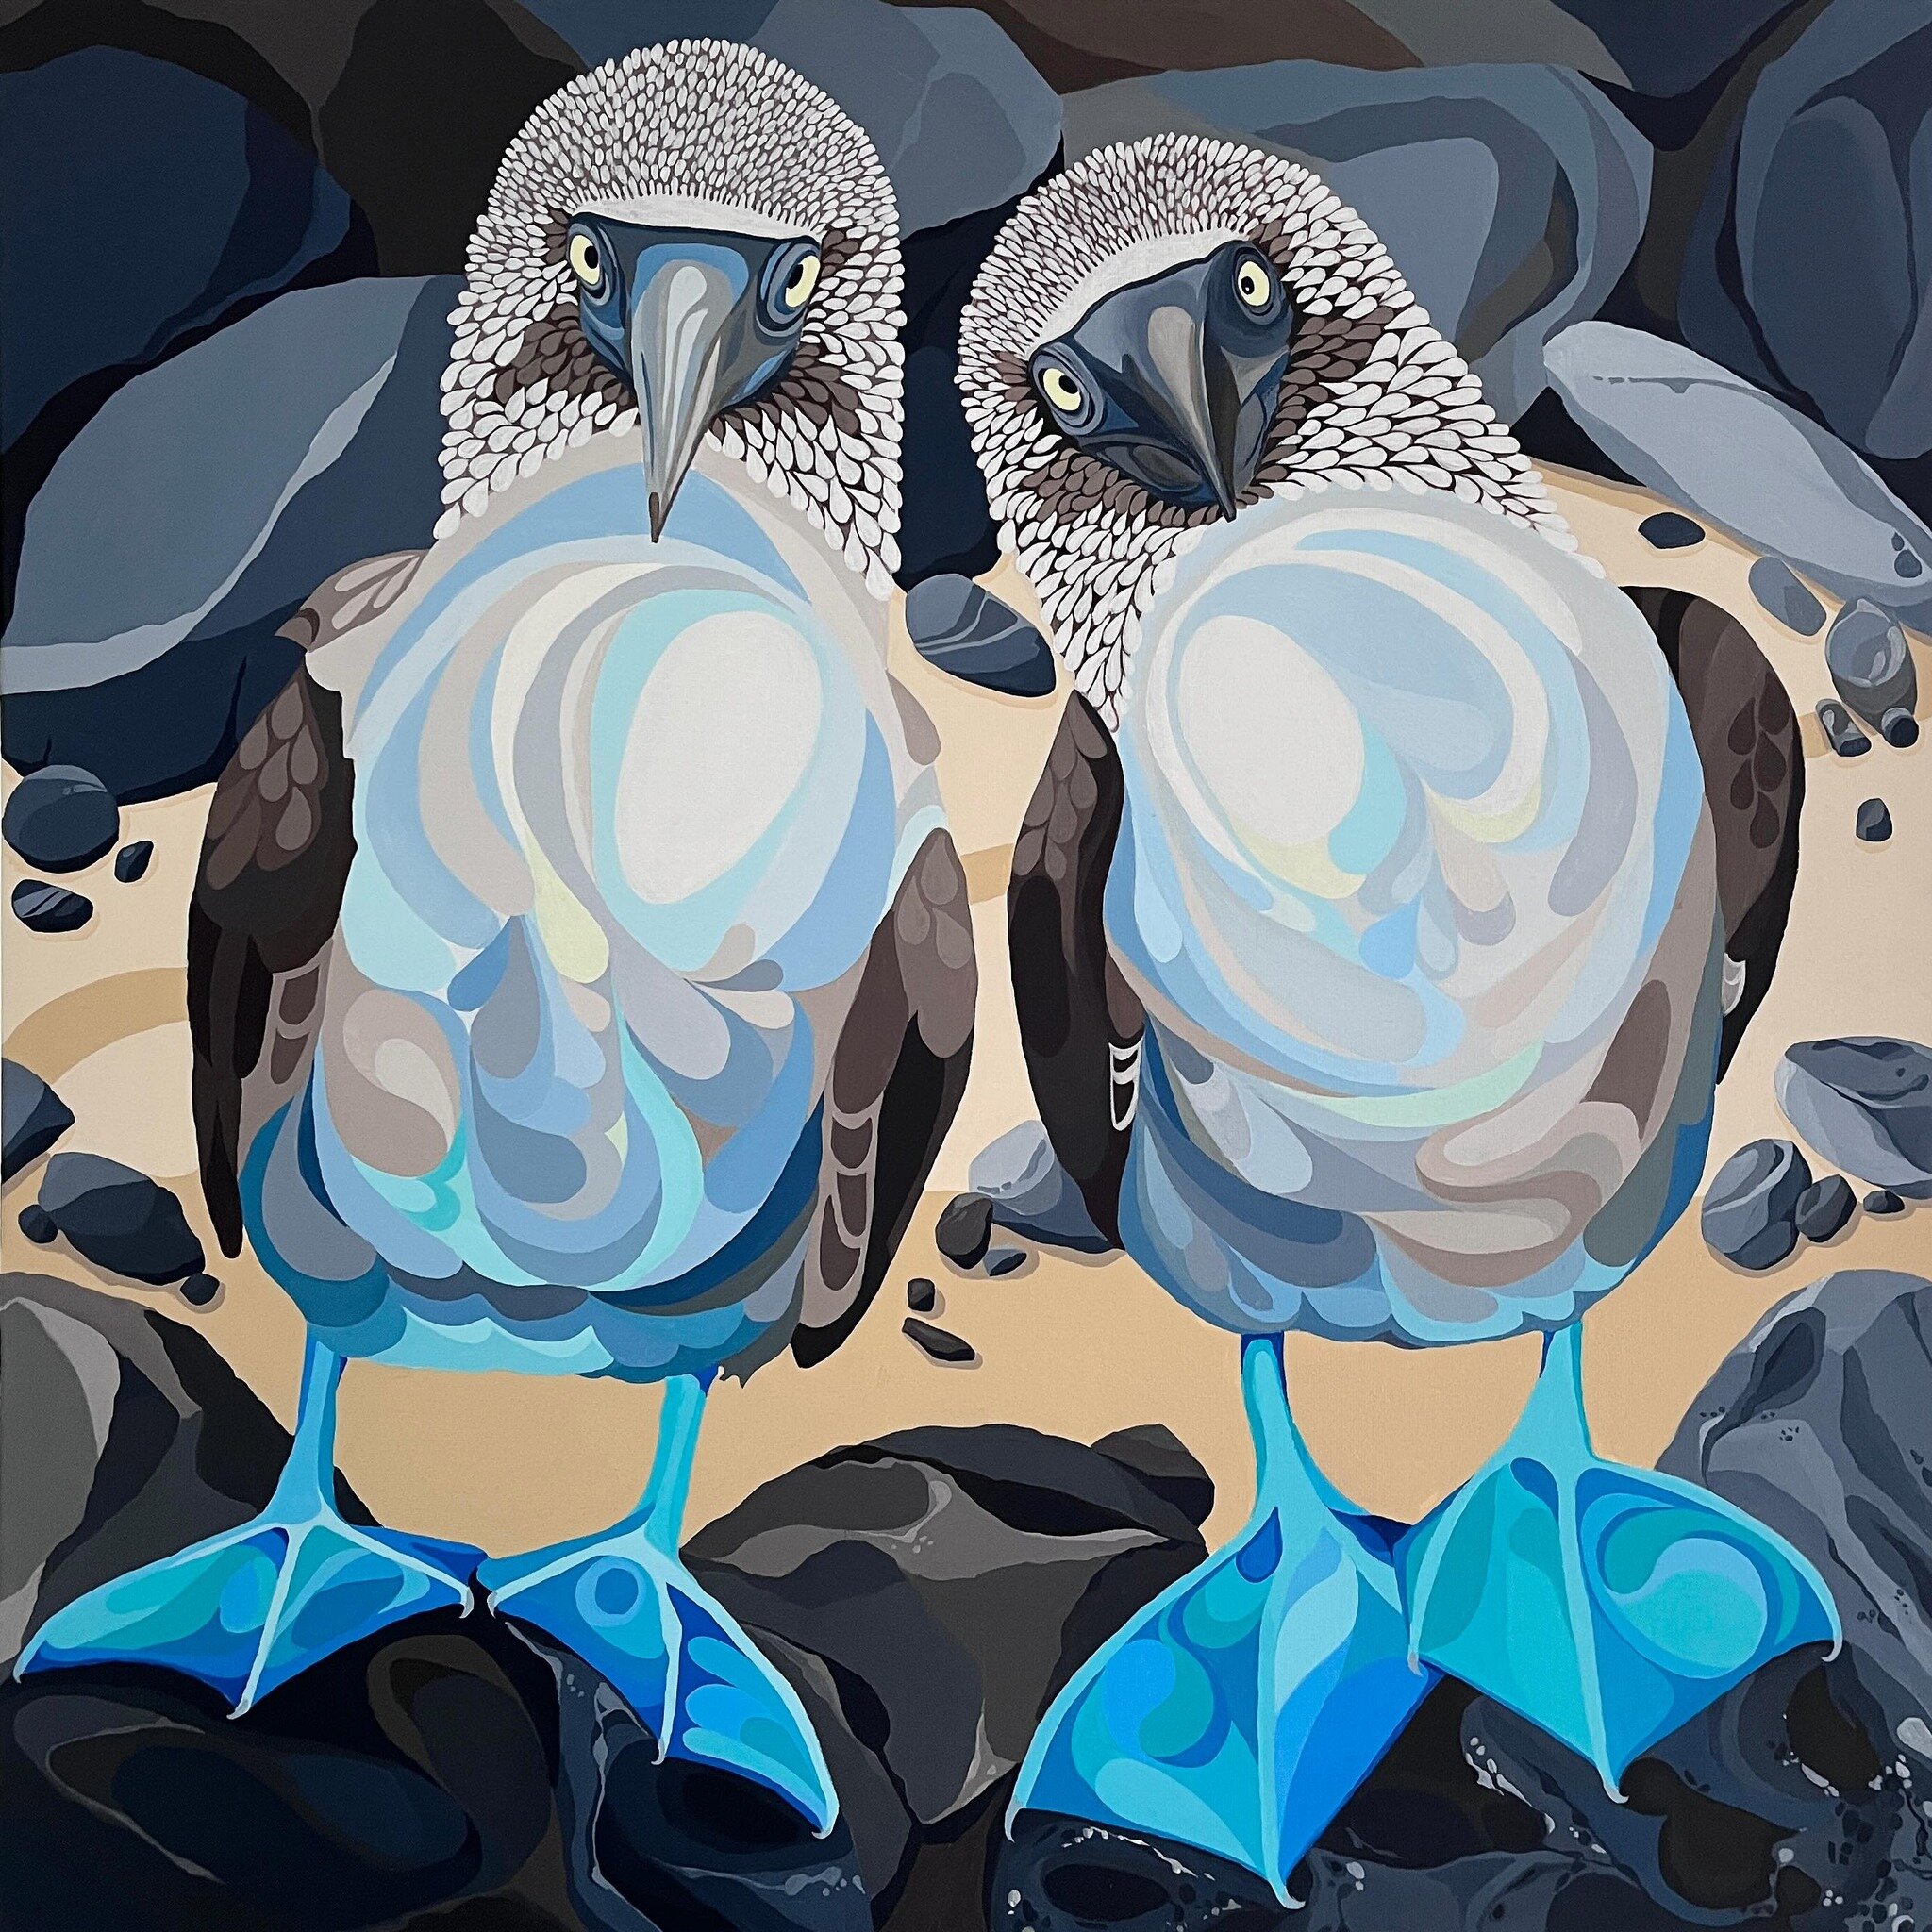 &lsquo;Best Friends&rsquo; new painting 60x60cm Blue Footed Boobys, it&rsquo;s been a lot of fun painting this one. 😃💙🩵

#bluefootedbooby #wildlife #coastalbirds #birdwatchers